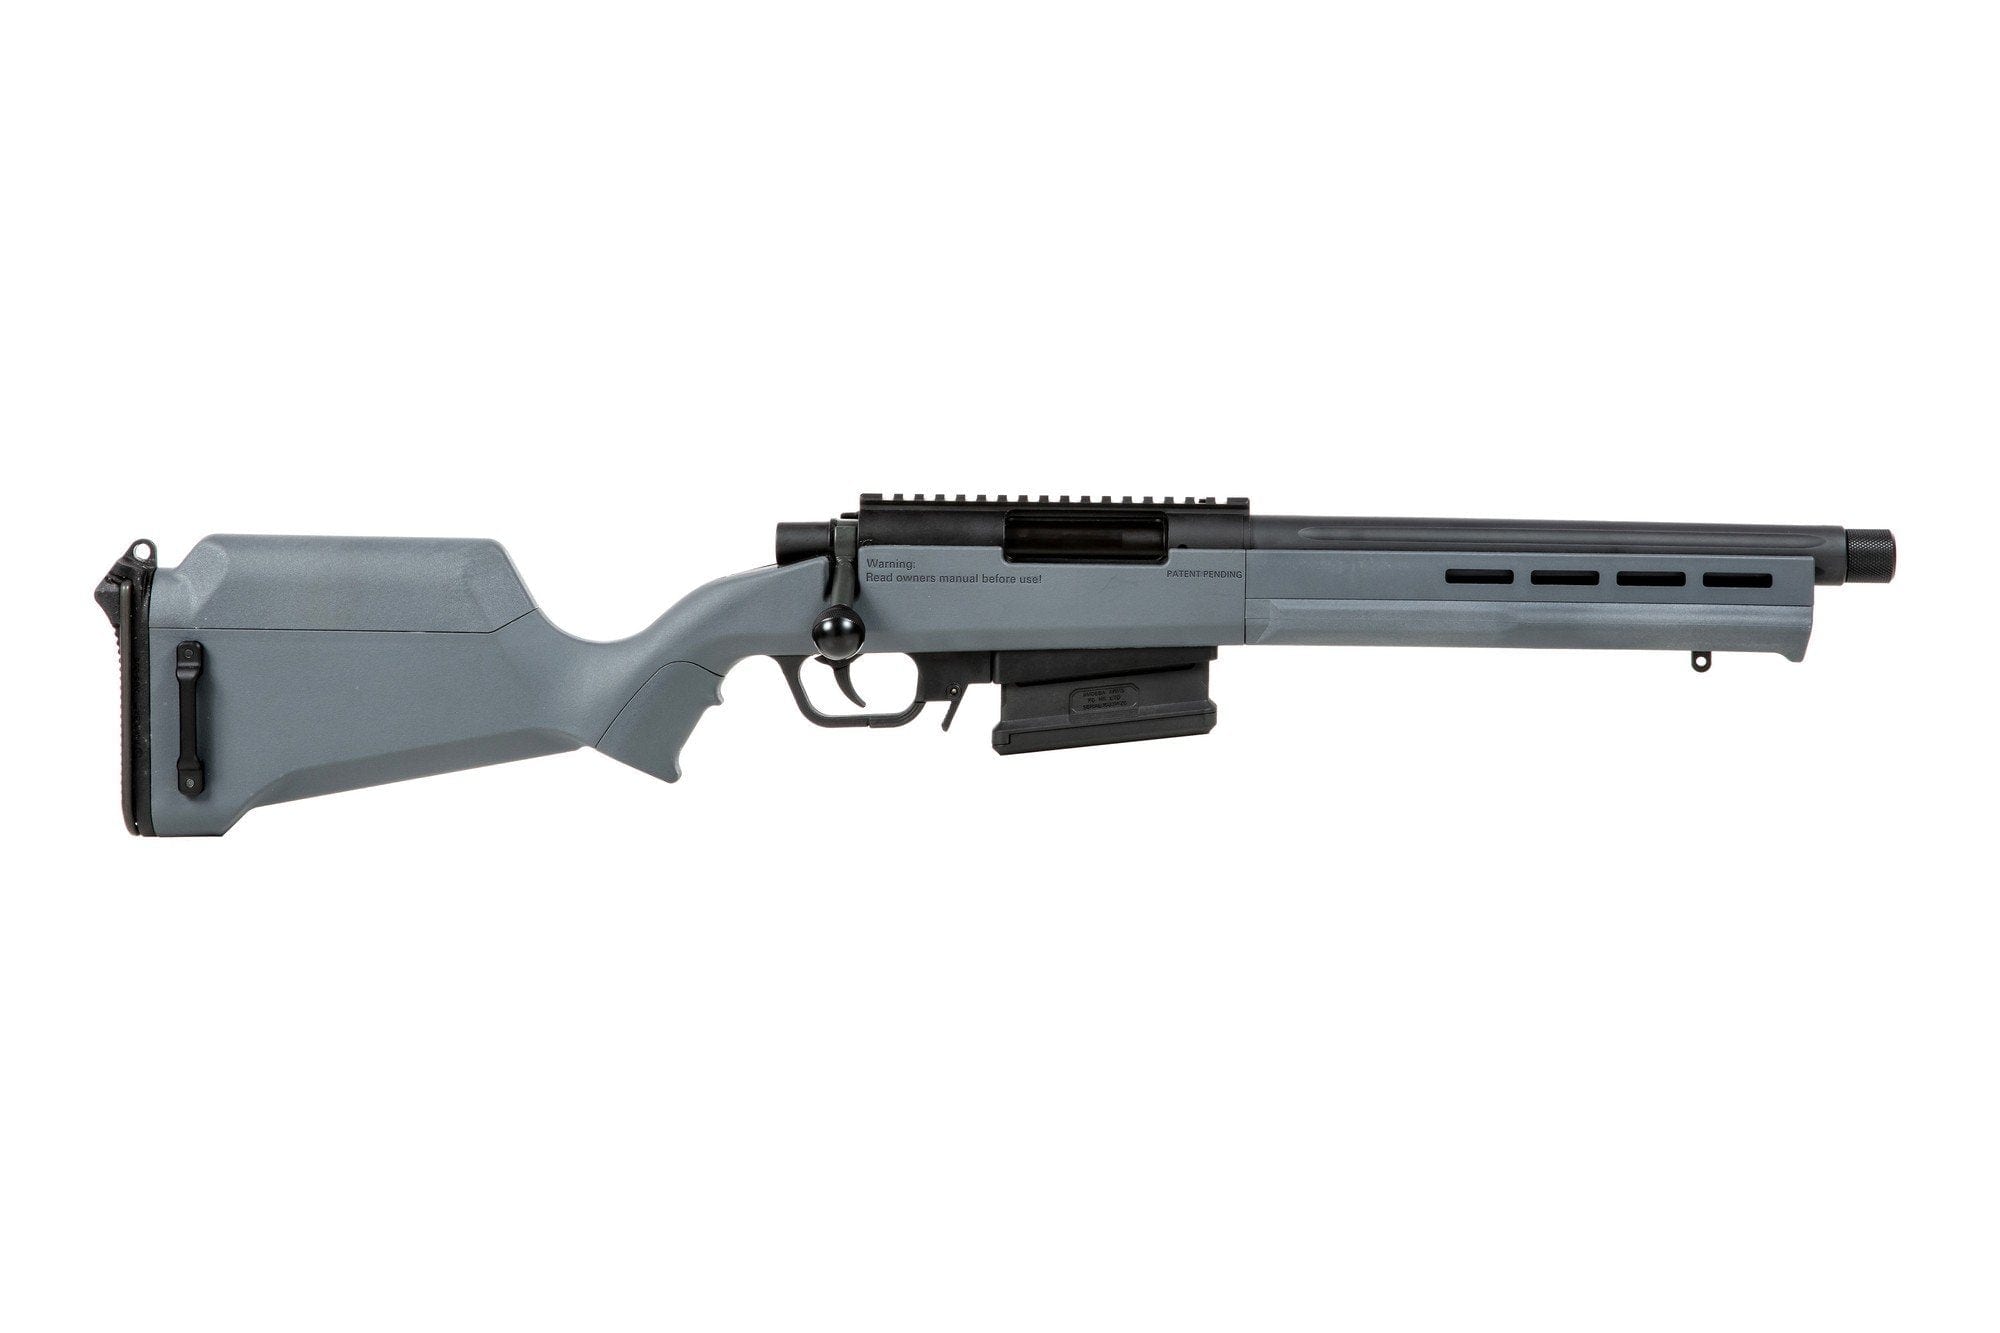 AS02 Striker Sniper Rifle Replica - Grey by AMOEBA on Airsoft Mania Europe